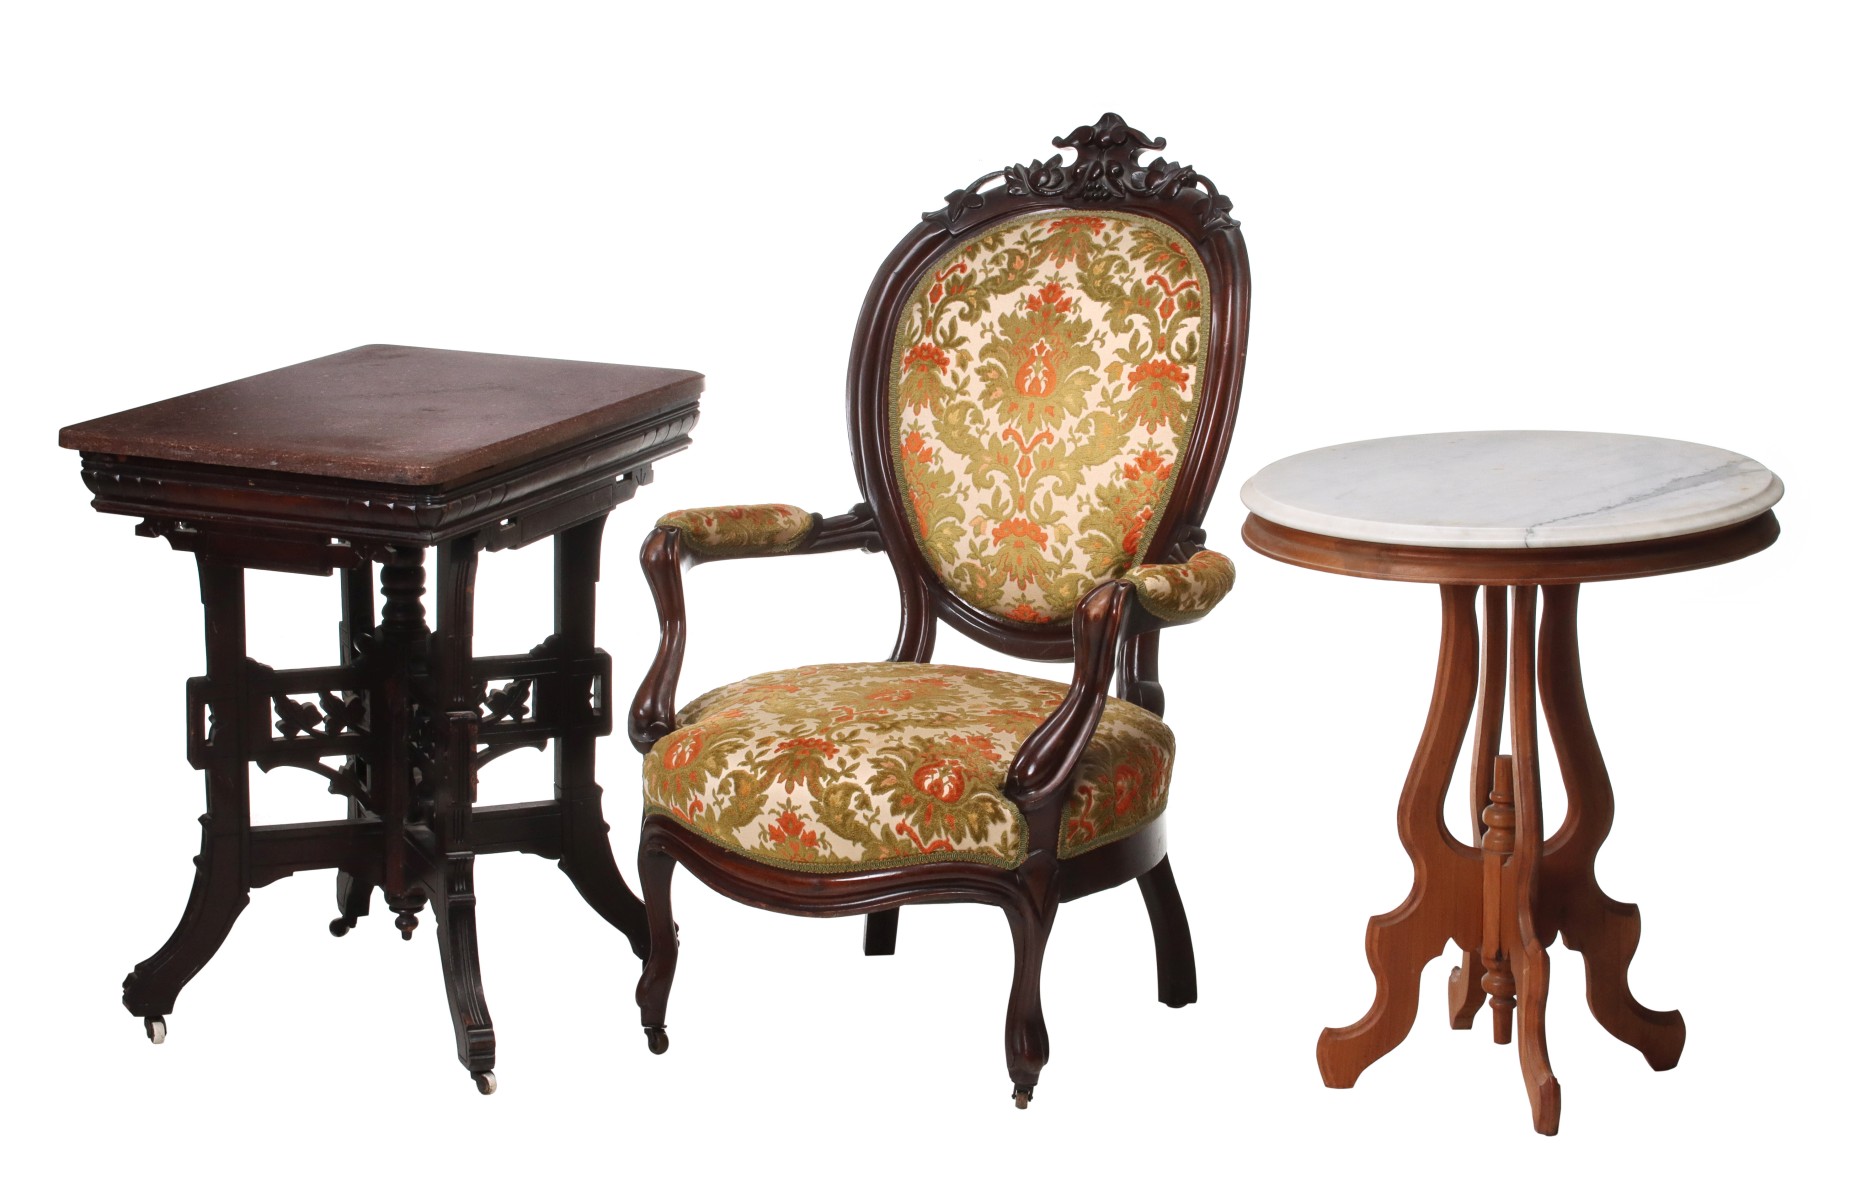 A NICE COLLECTION OF AMERICAN VICTORIAN FURNITURE